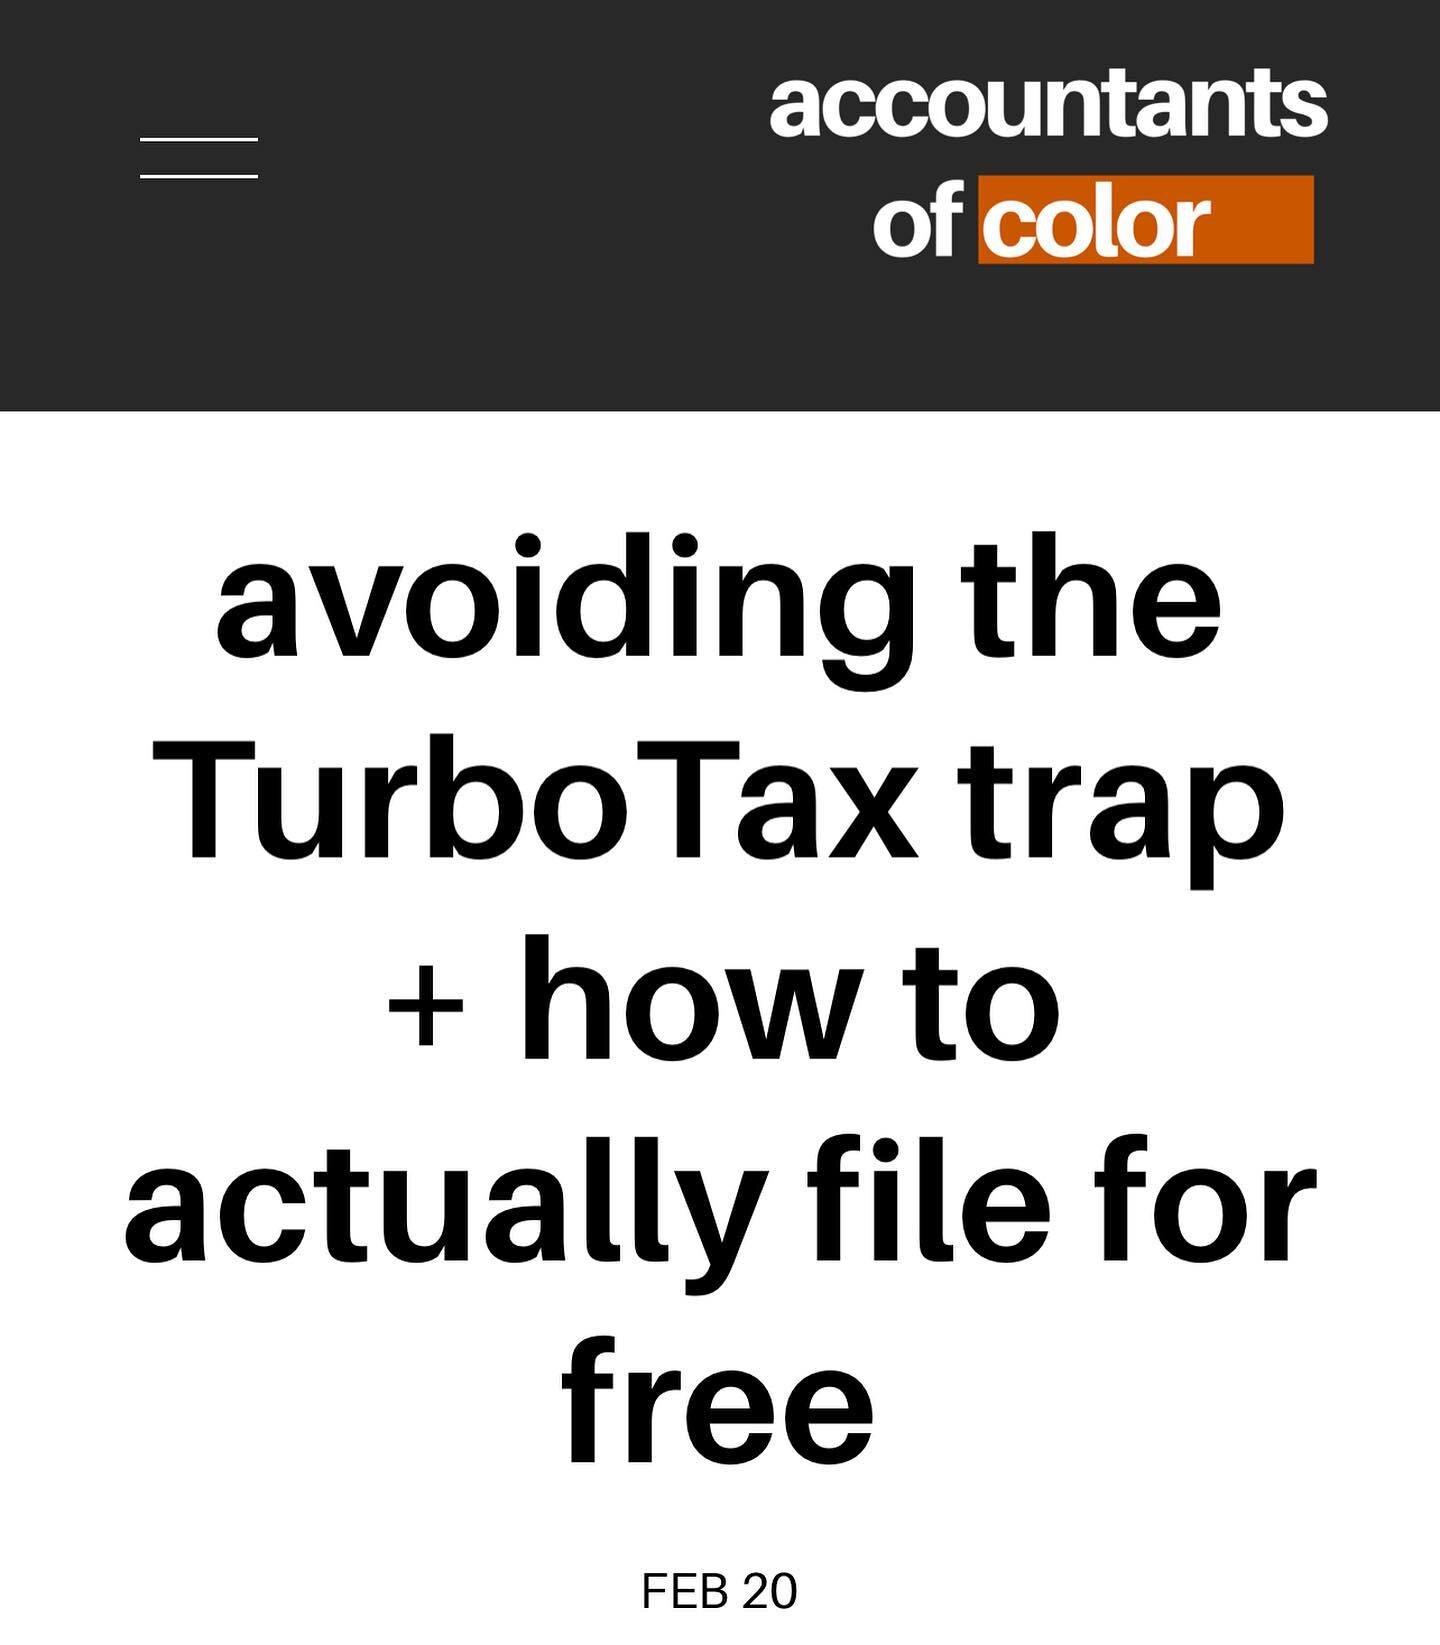 New Blog Post!!! Read all about the tricks that Turbo Tax has been playing, how to ACTUALLY file for free and when it makes sense to hire -including all the links! My friend and fellow AOC Lulu (@tax_clown) inspired this post and broke down how to ma